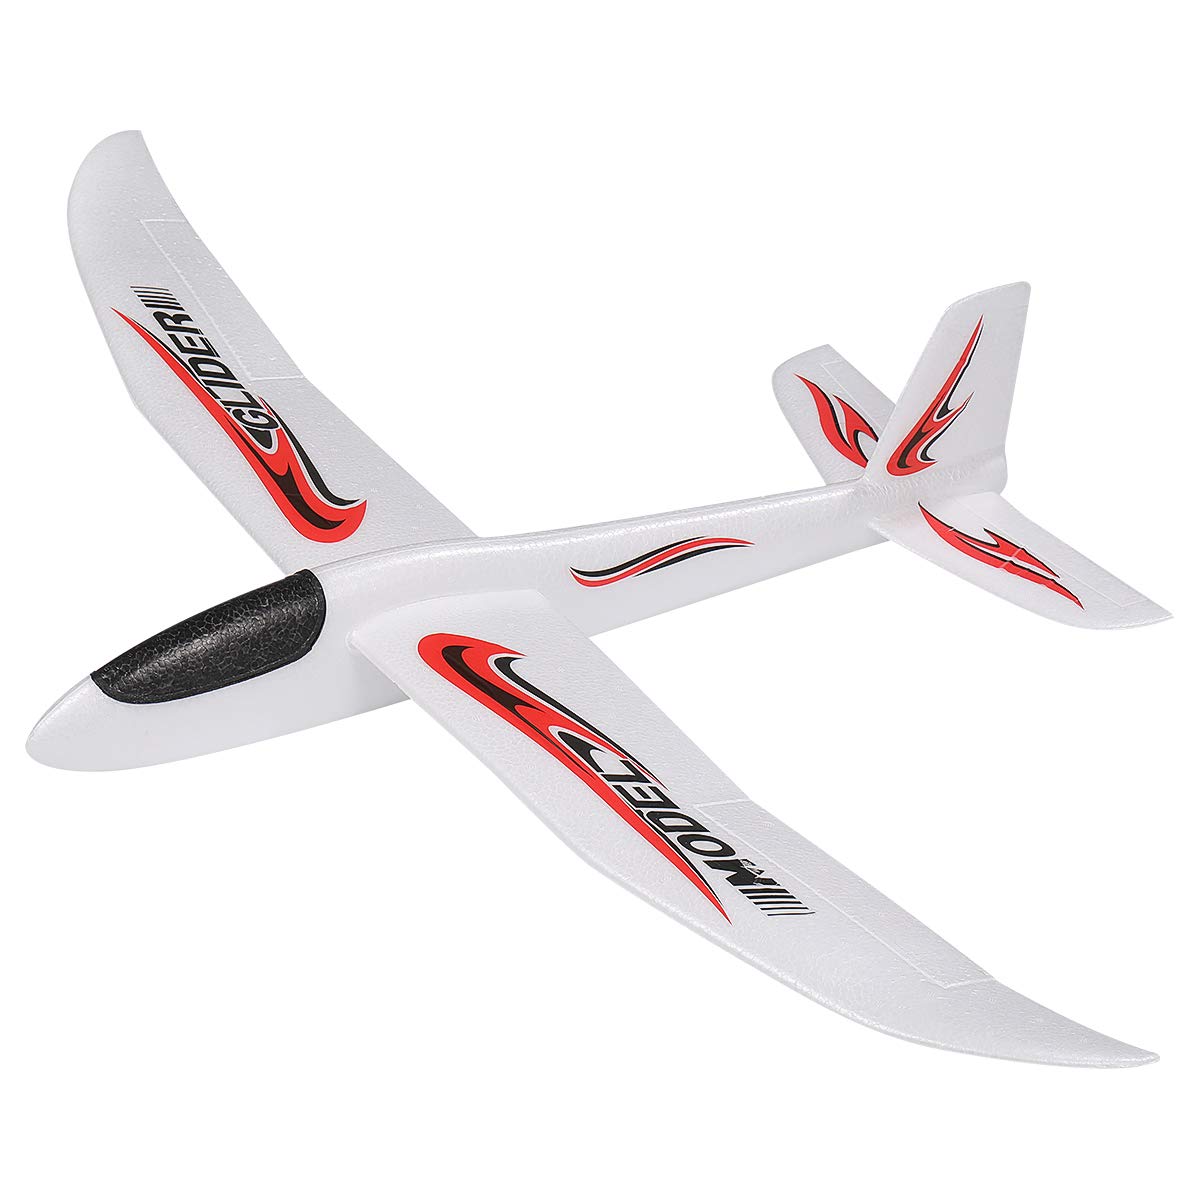 LED Flying Toys Toyandona 1PC FOAM GLIDER AIRPLANE 39 INCH Large Showing Planes Lightweight Outdoor for Girls Boys PartyまたはGi Ammnj